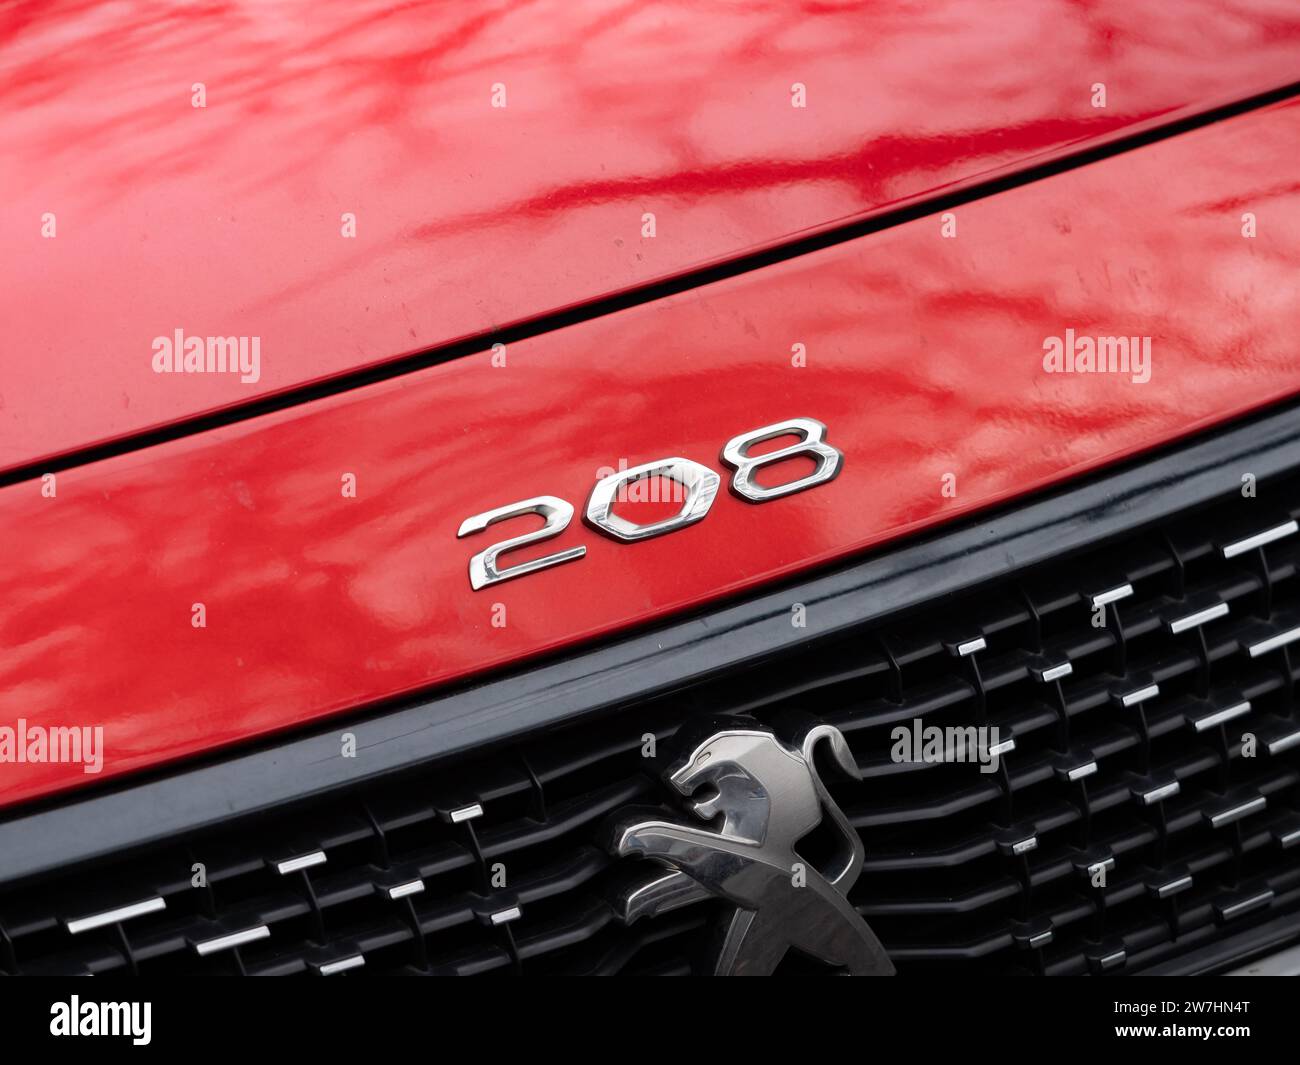 Peugeot 208 emblem of the French car brand. Close up of the hood with the icon on the exterior. Logo sign on the red color at the front. Stock Photo